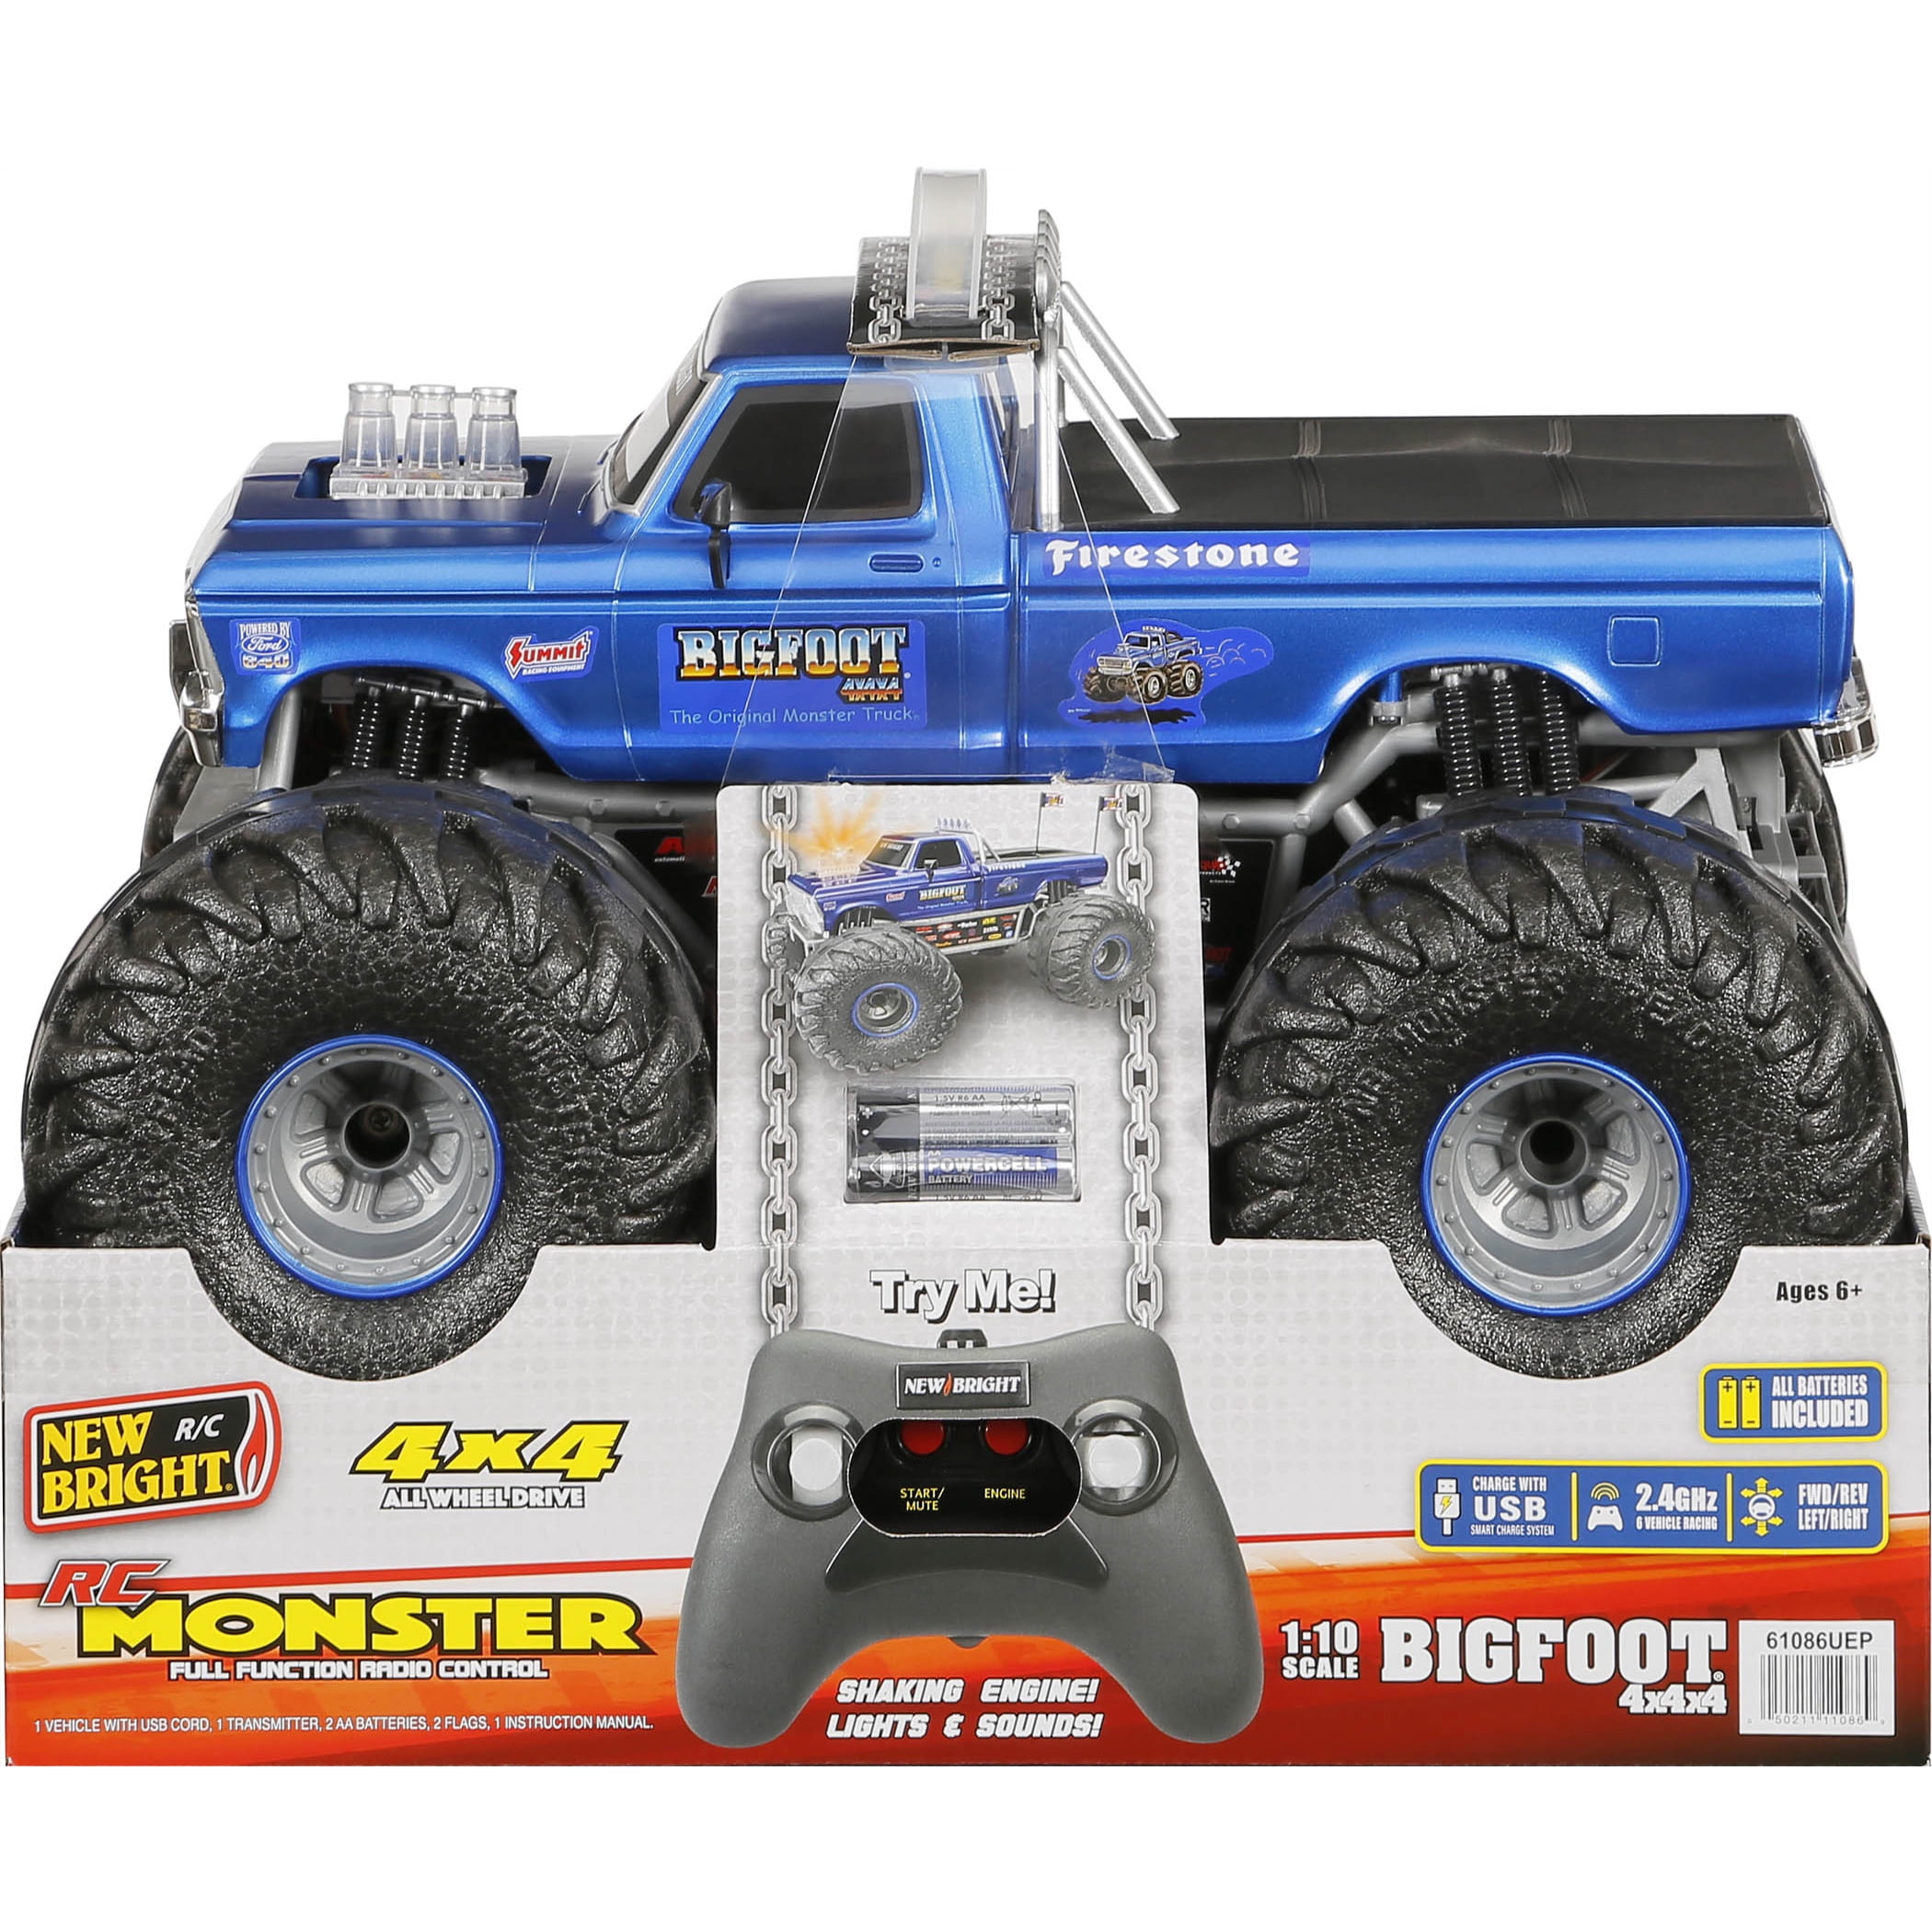 New Bright (1:10) Bigfoot Battery Radio Control Monster Truck with Lights and Sounds, 61086UEP - 1